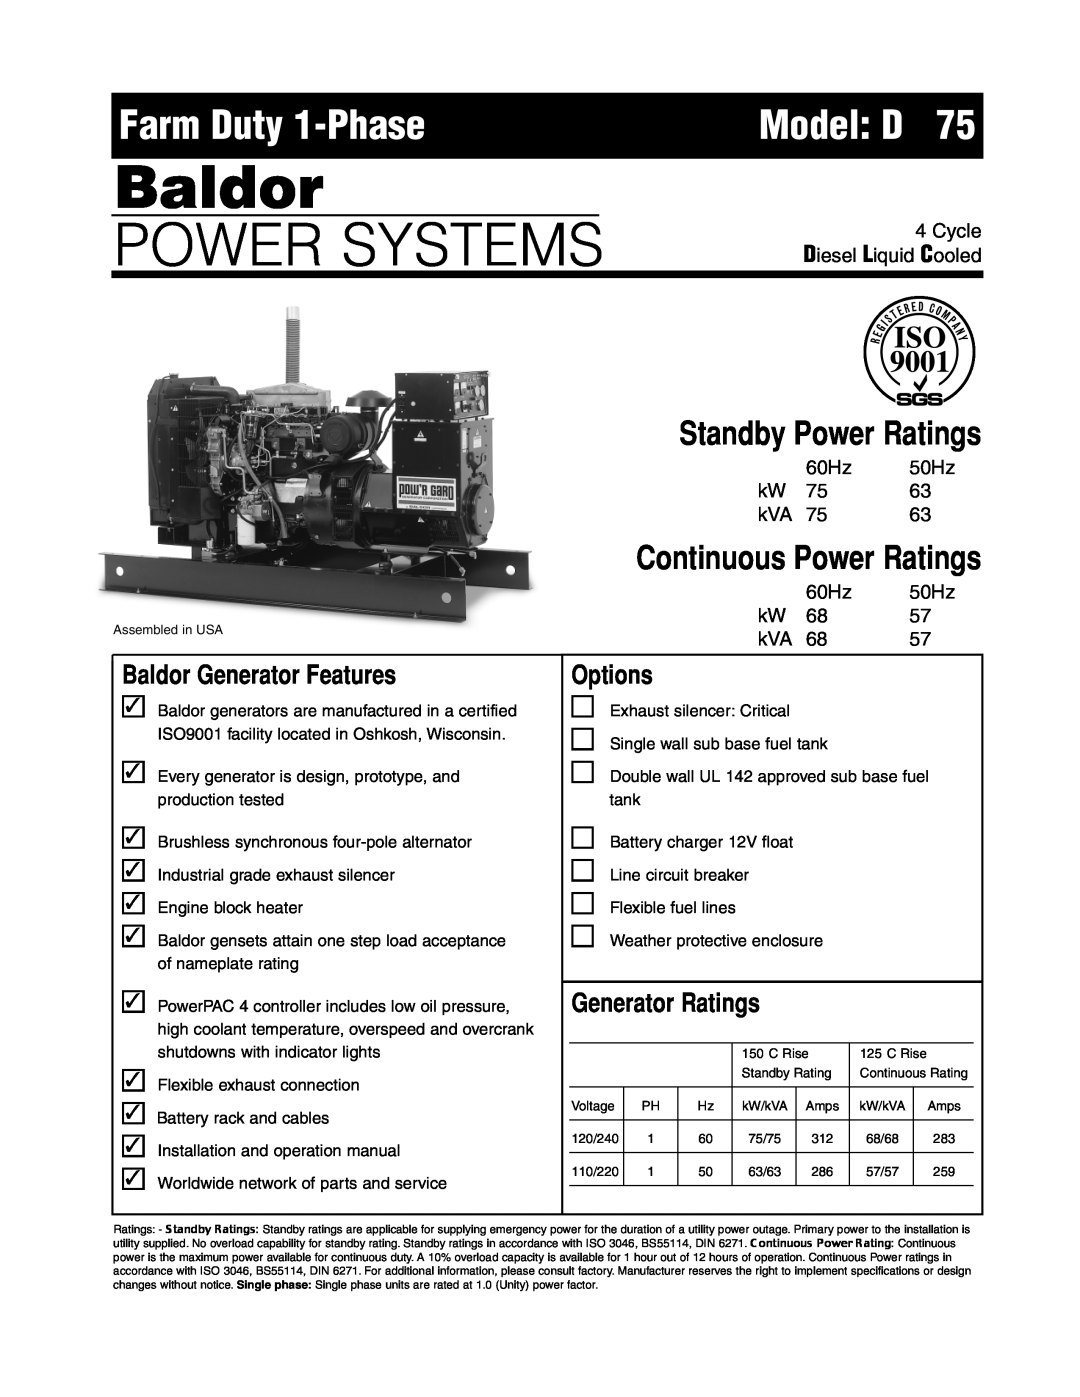 Baldor ISO9001 Model D75, Baldor, Power Systems, Farm Duty 1-Phase, Standby Power Ratings, Continuous Power Ratings, 60Hz 